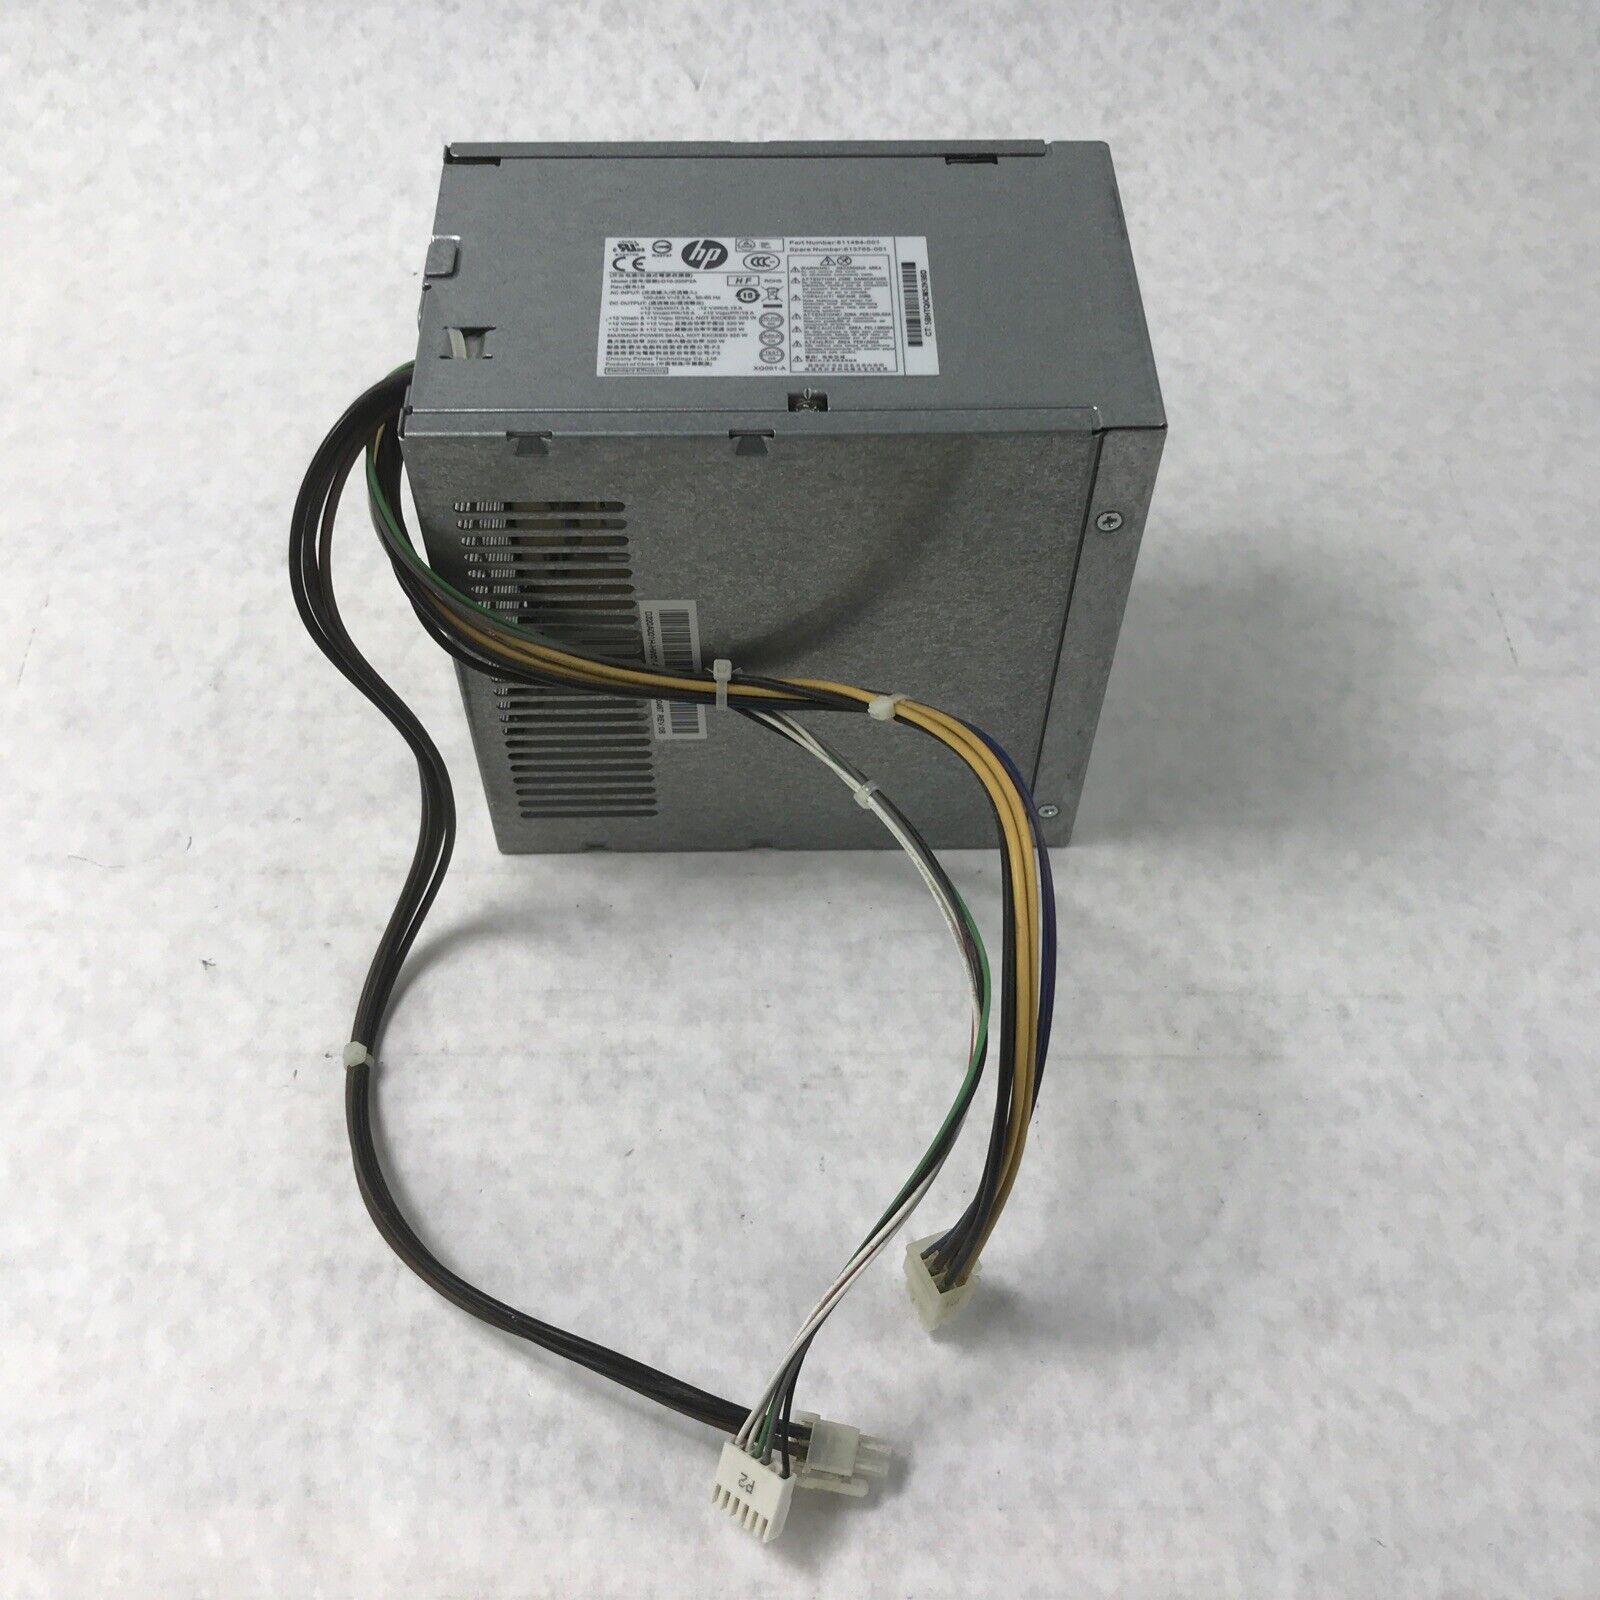 HP D10-320P2A 320W 240V 60Hz Power Supply (Tested and Working)